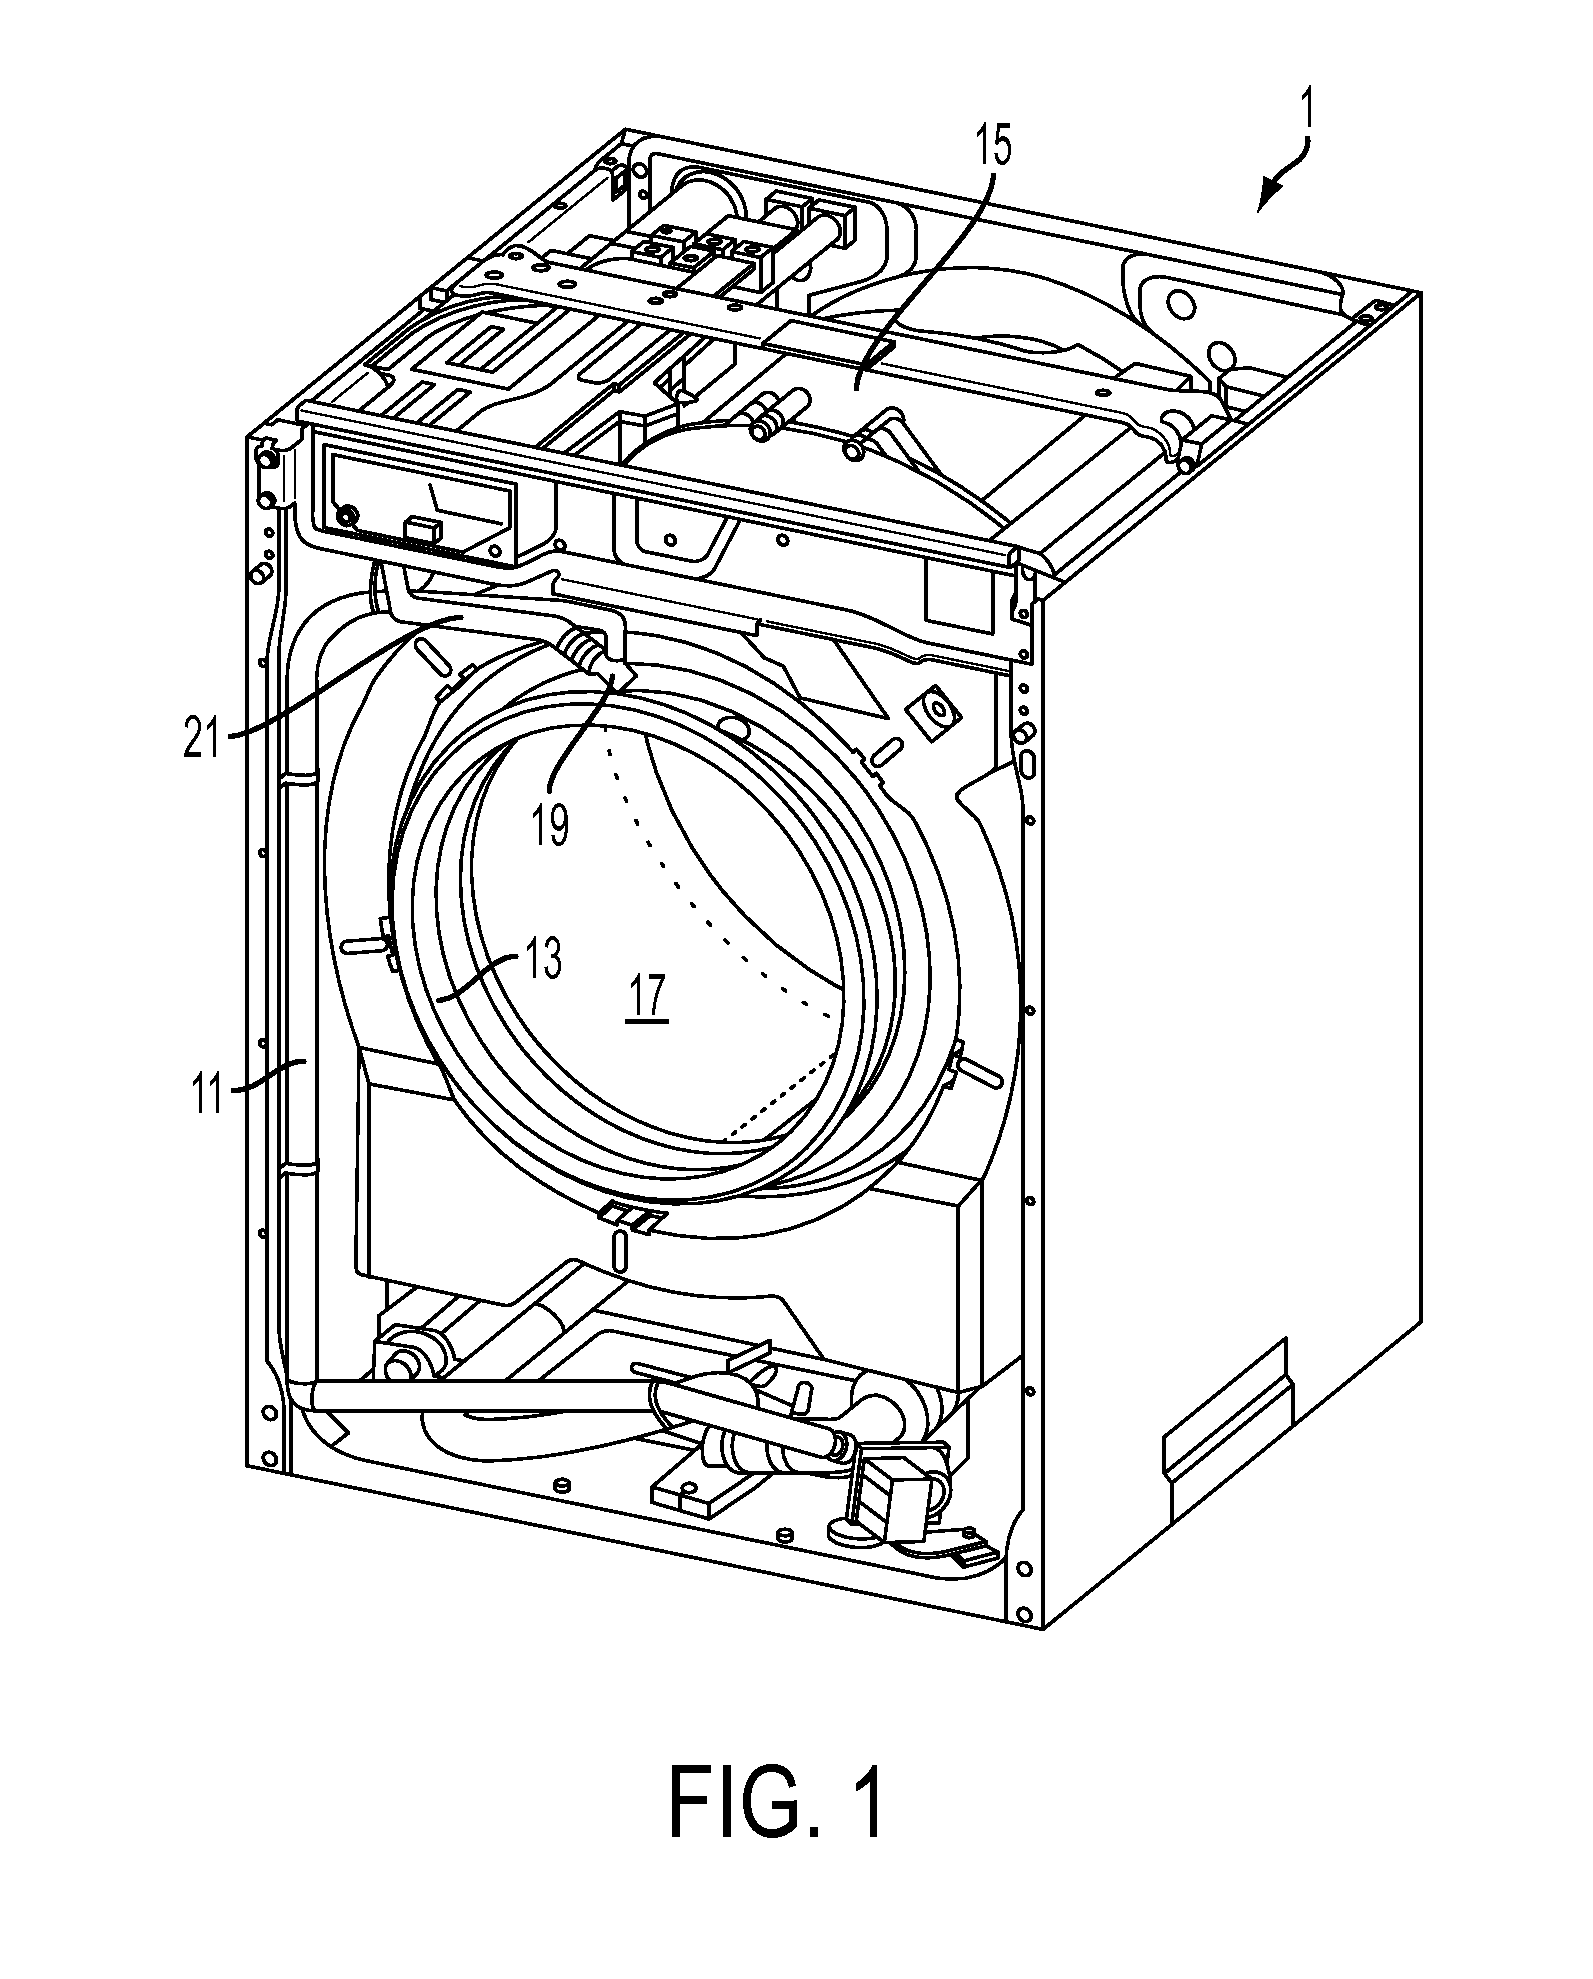 Water Recirculation and Drum Rotation Control in a Laundry Washer